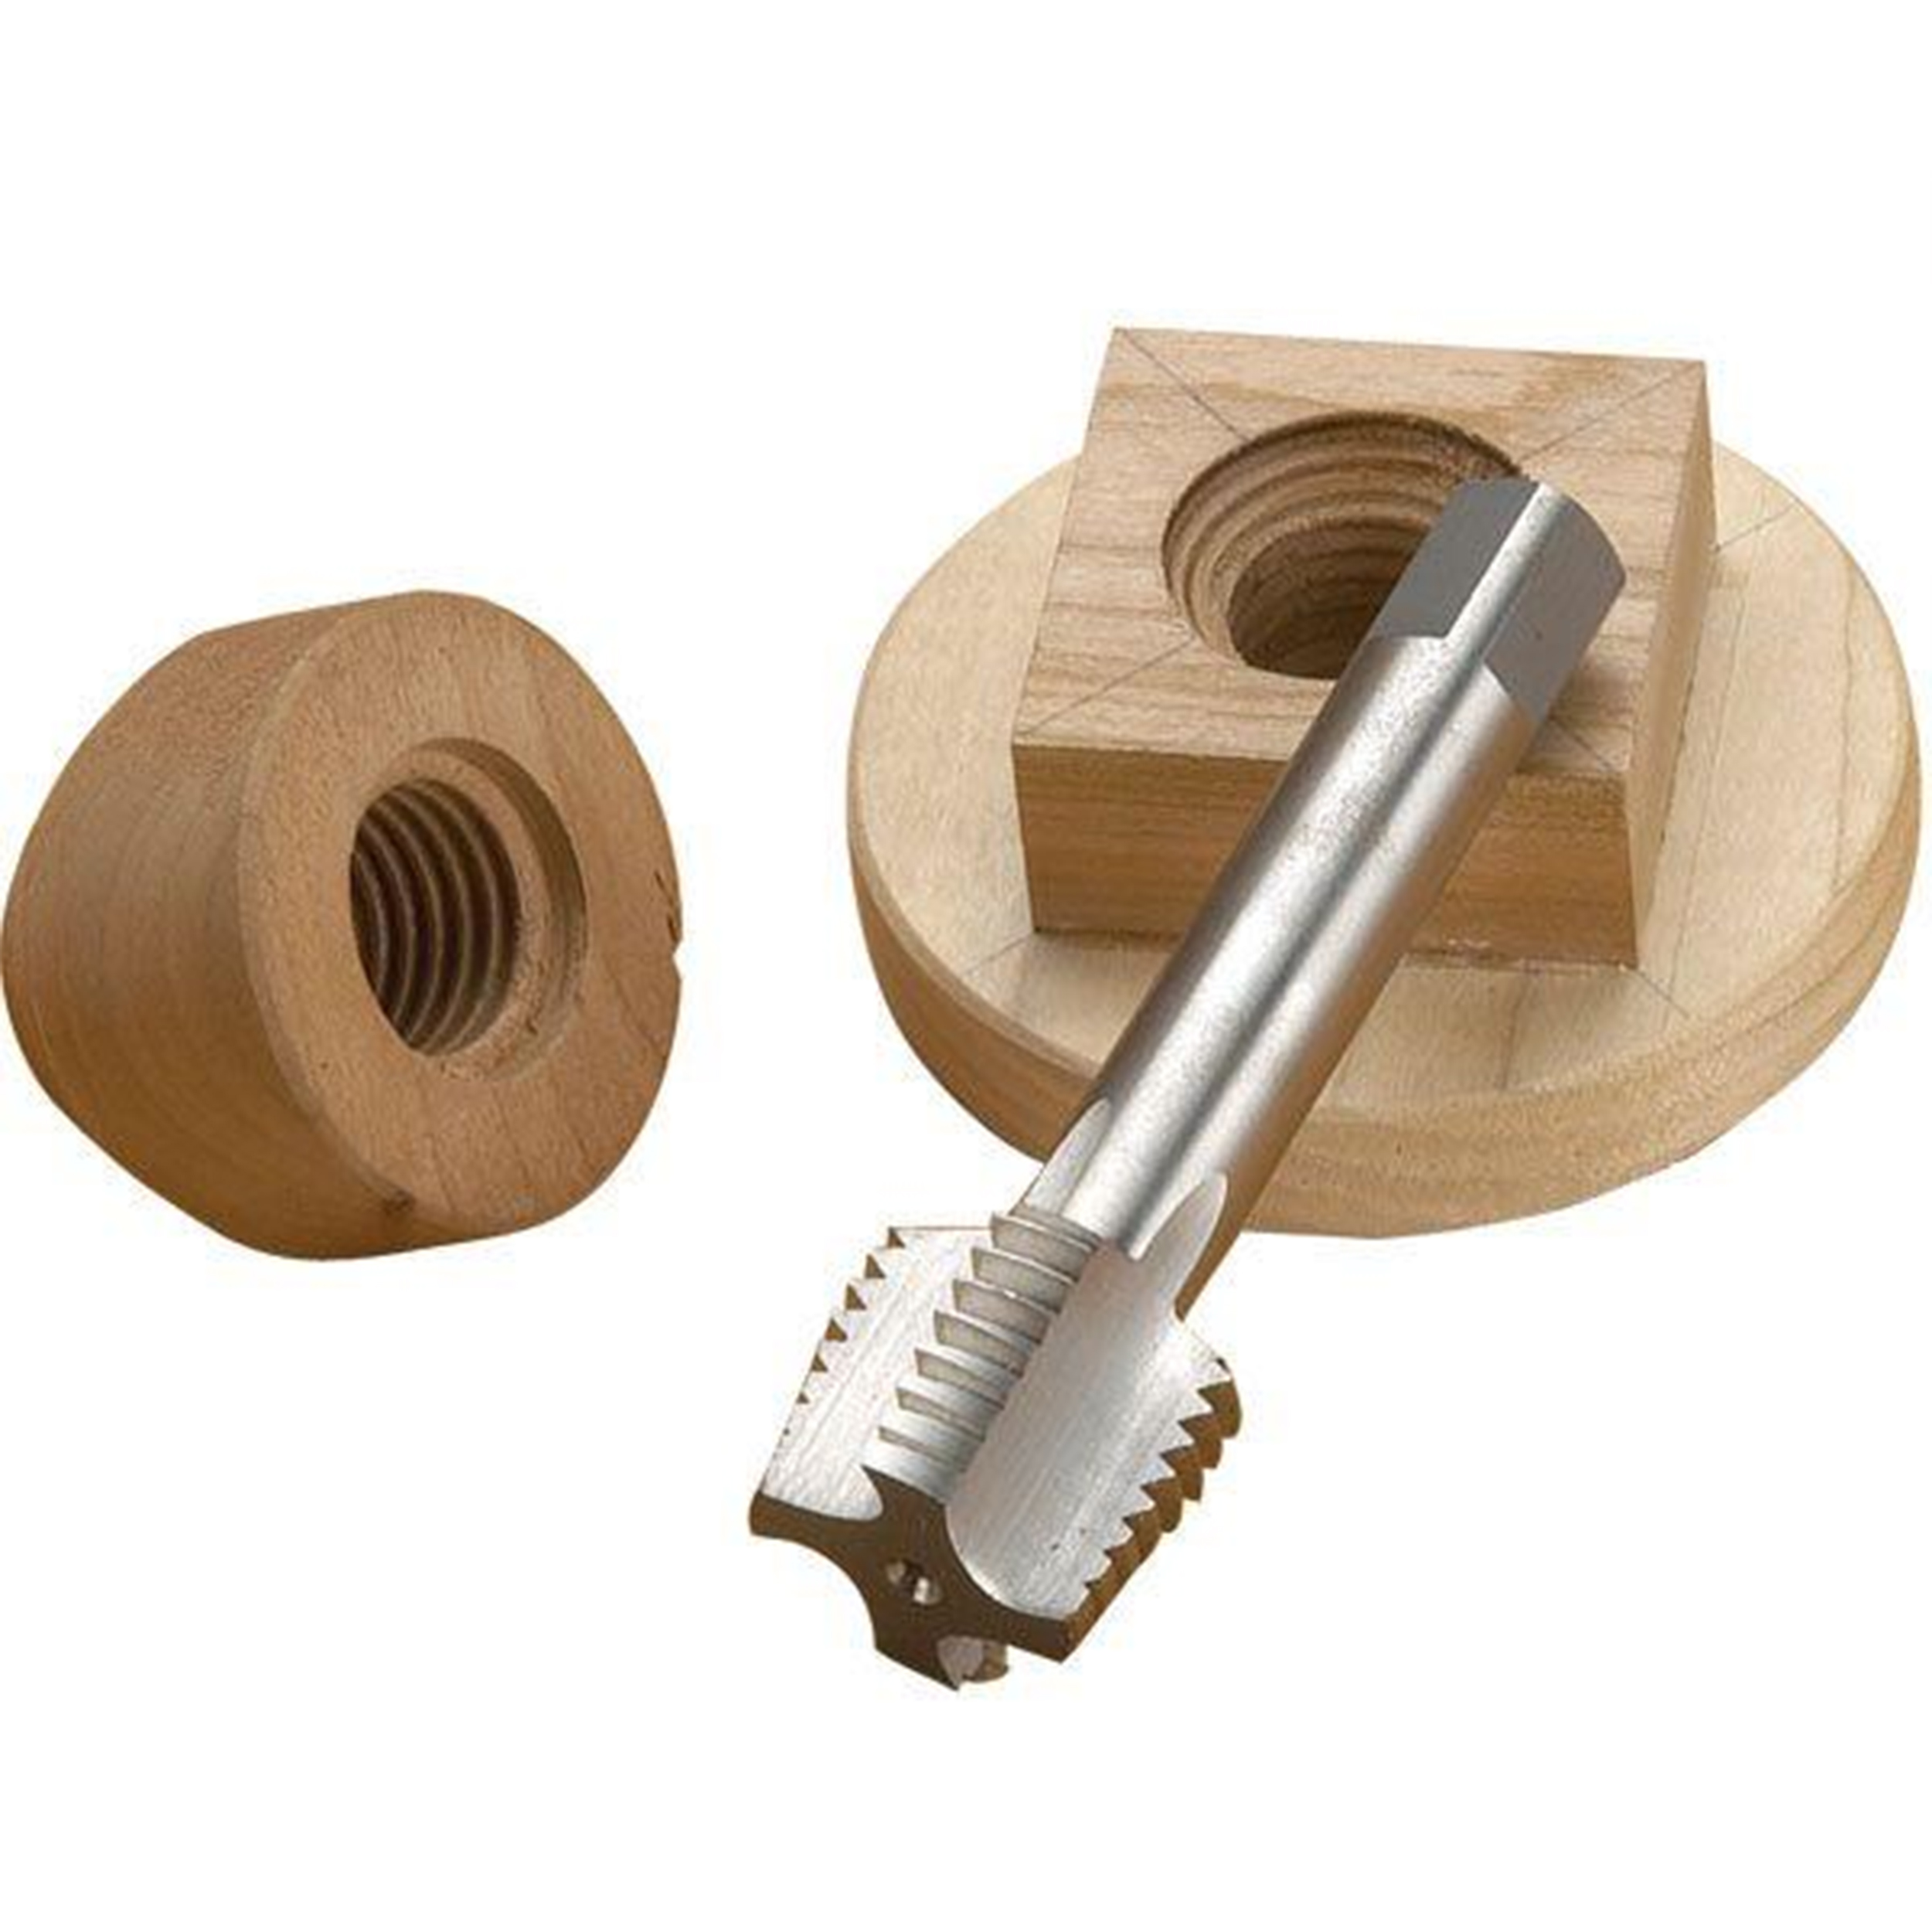 Beall Spindle Tap, 1" X 8 Tpi